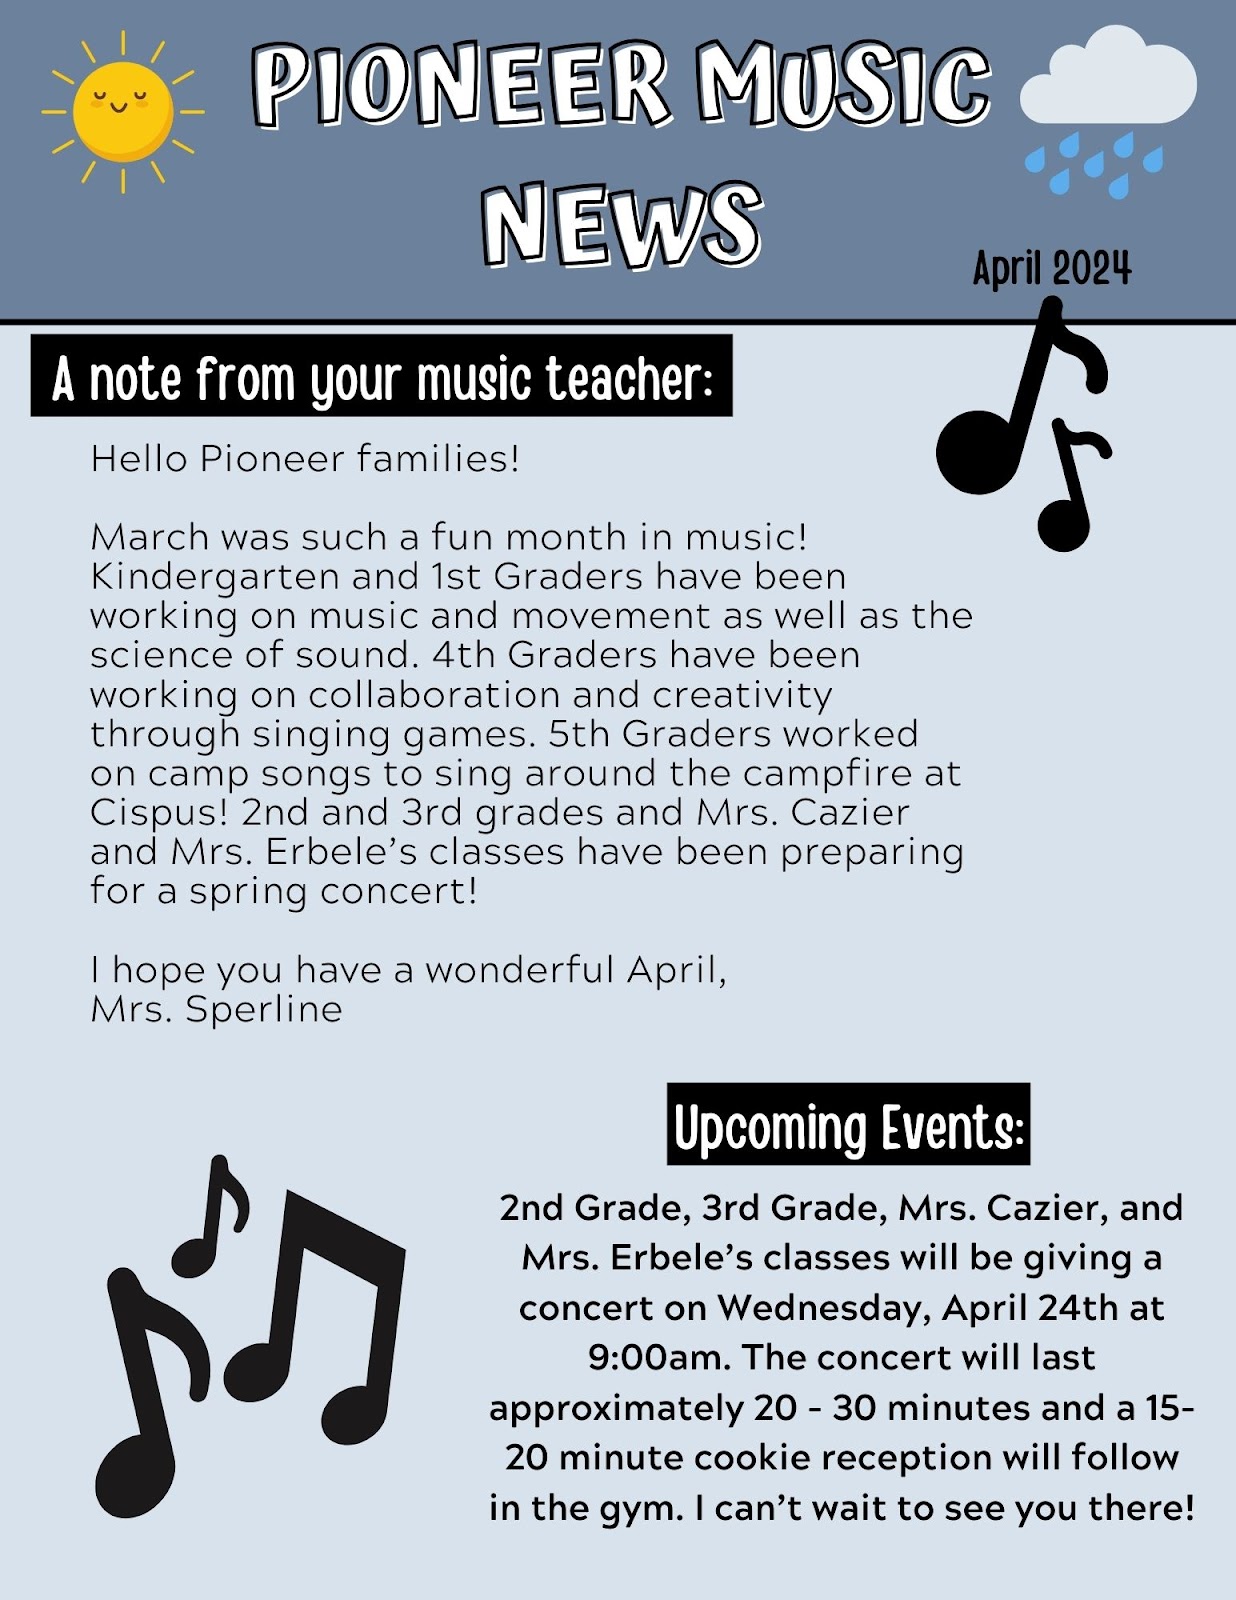 News from Music sharing the fun learning happening in Music class. Kindergarten and first grade worked on music and movement and the science of sound. 4th grade worked on collaboration and creativity through singing games. 5th grade learned camp songs for outdoor camp at Cispus. 2nd/3rd grade and Mrs. Cazier's and Ms. Erbele's students are preparing for their spring concert which will be on April 24 at 9:00 AM. Families of those students are invited to attend this performance.